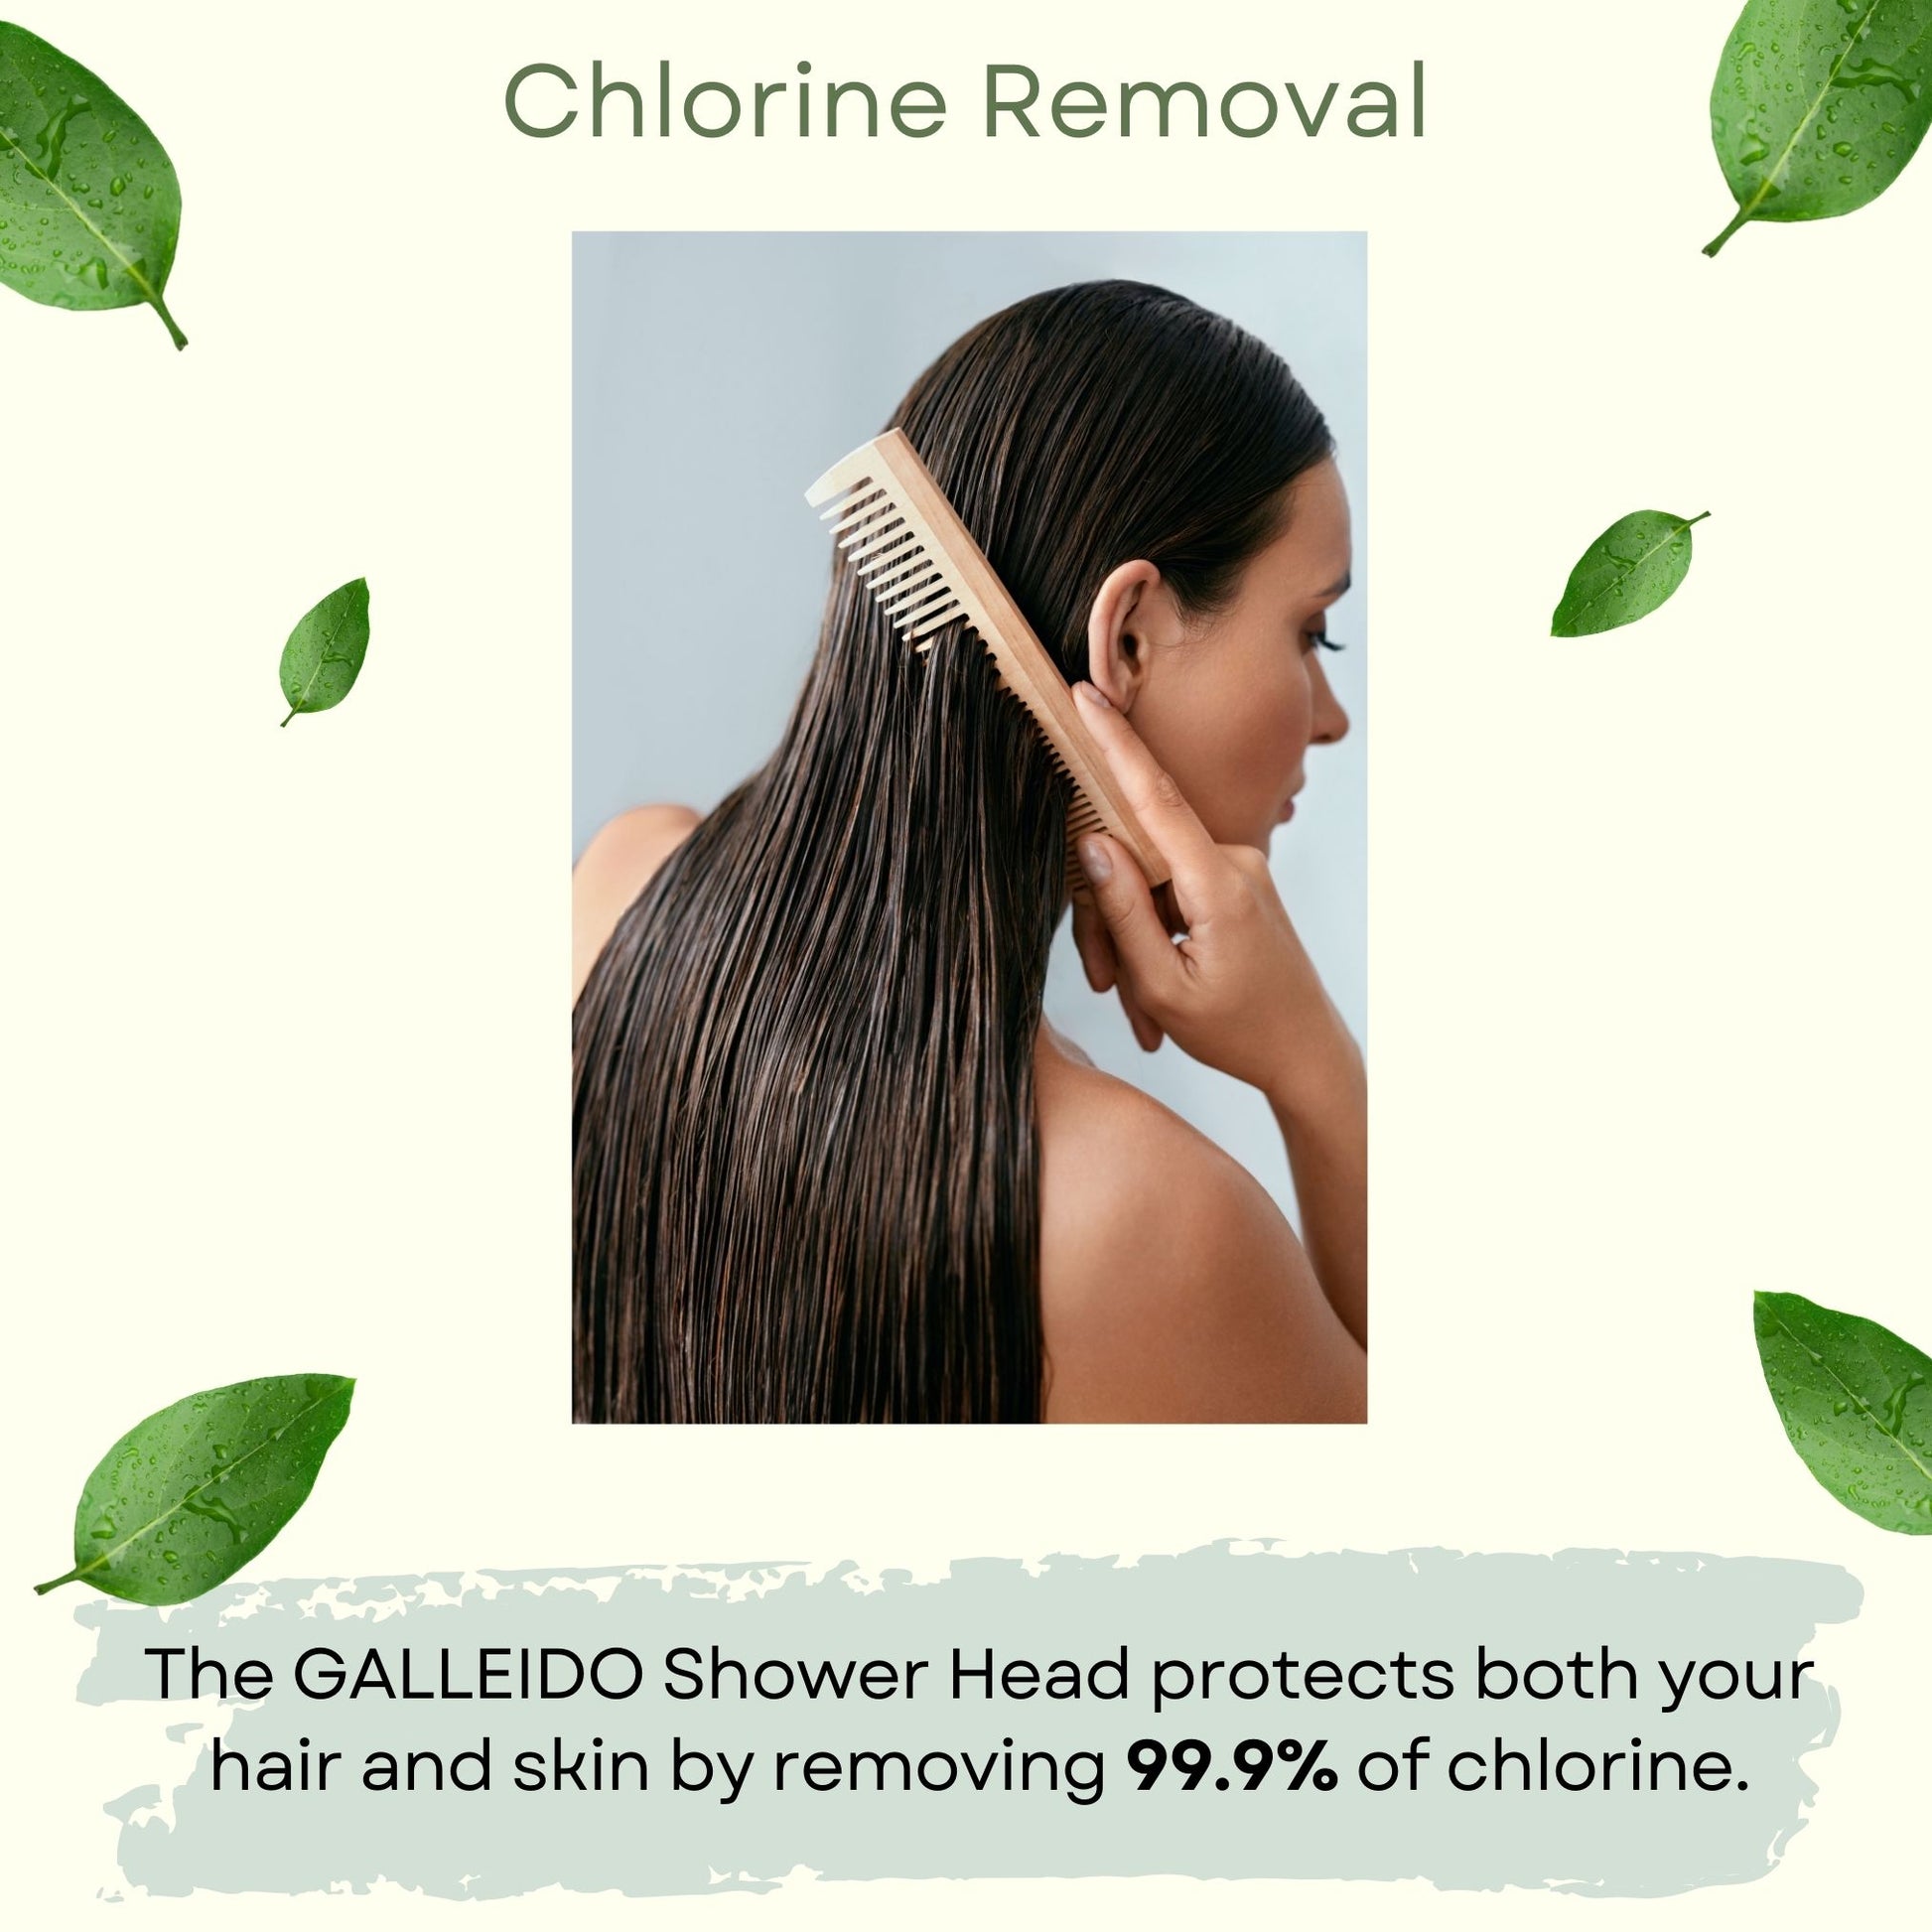 A graphic with a photo of a girl who looks like she just took a shower with the text, "The GALLEIDO Shower Head protects both your hair and skin by removing 99.9% of chlorine"